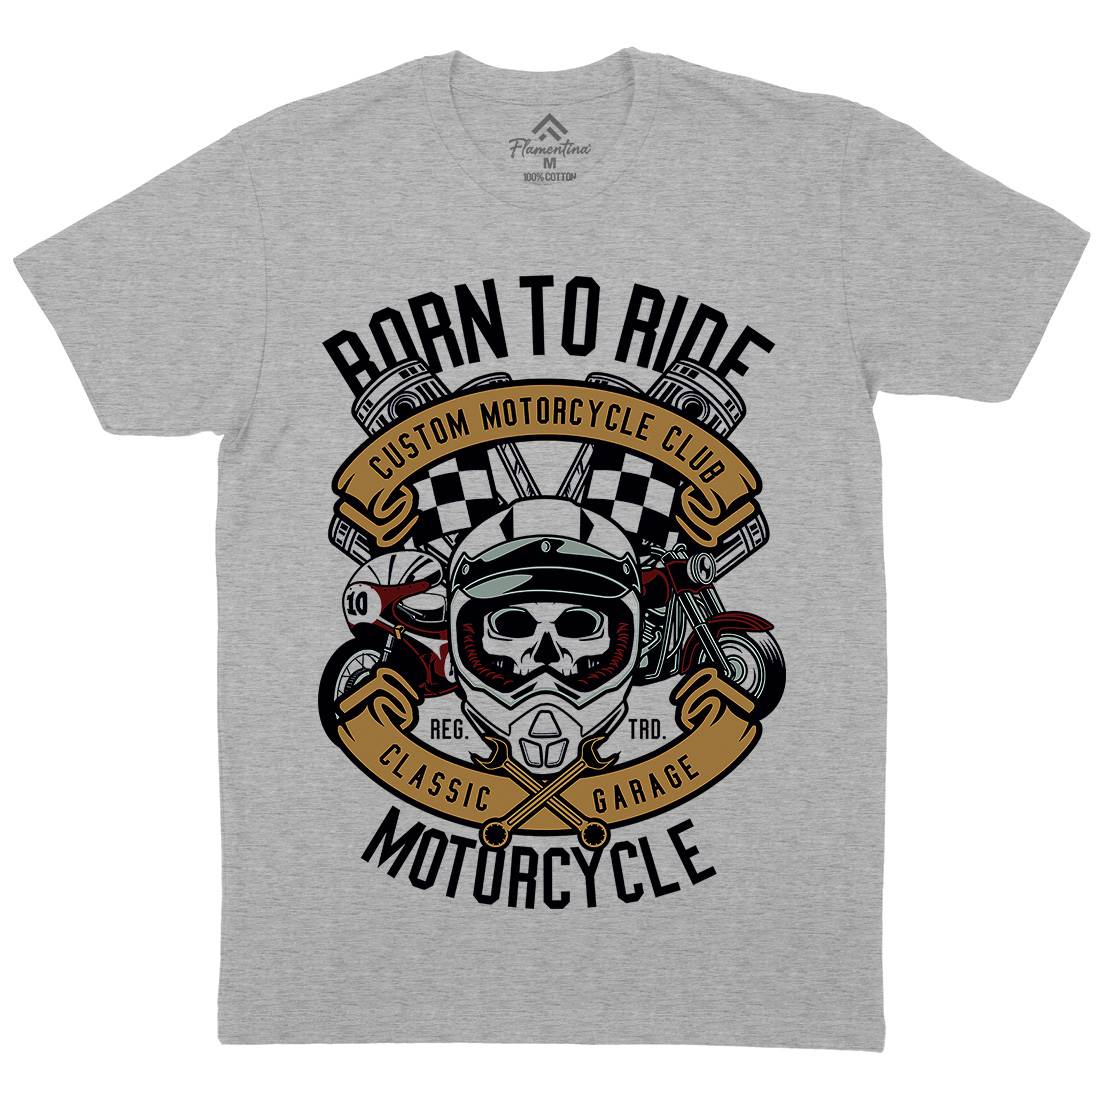 Born To Ride Mens Crew Neck T-Shirt Motorcycles D509